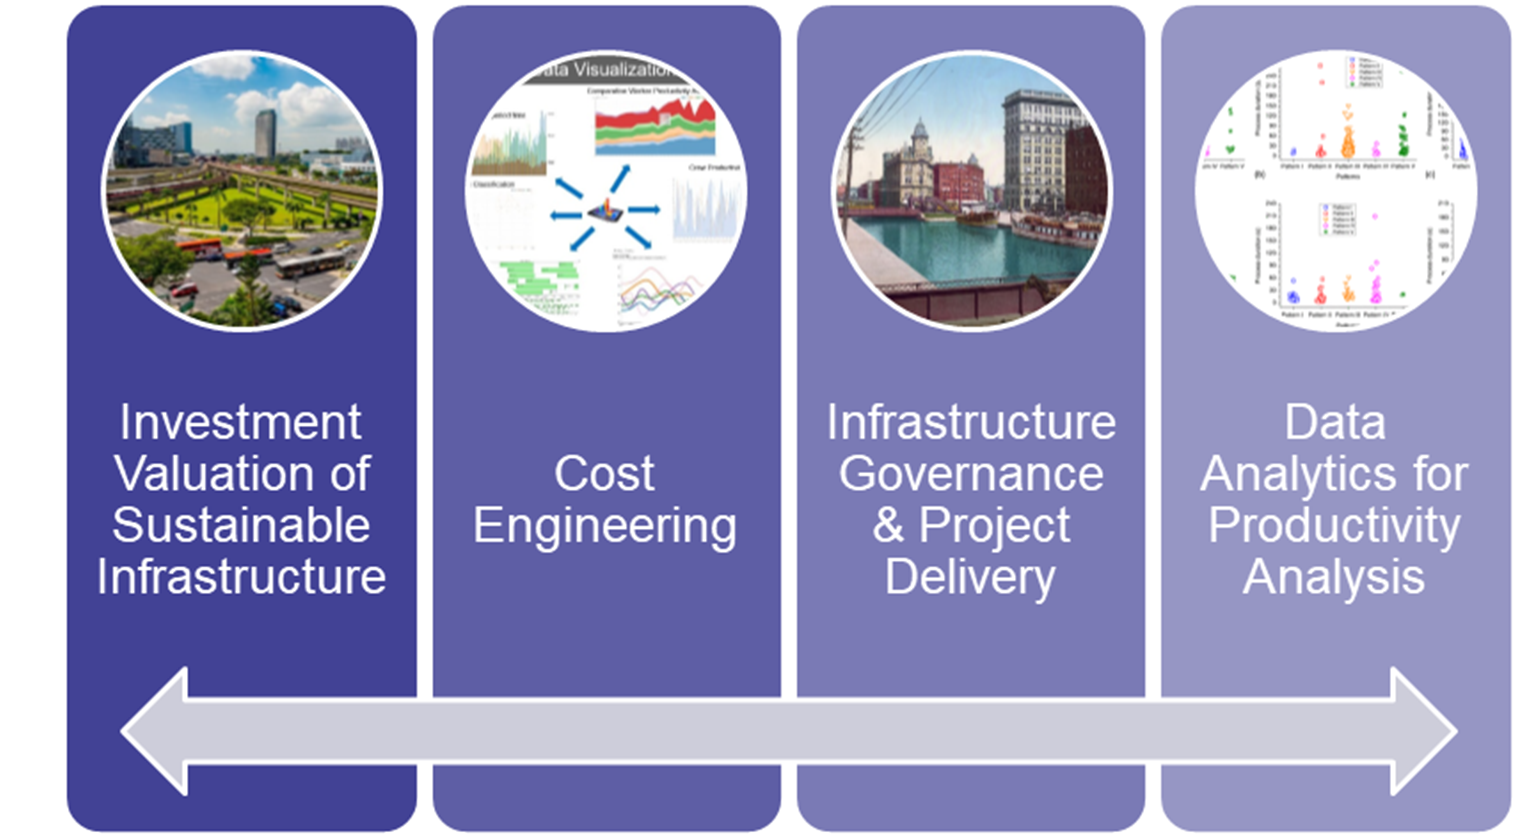 A slide highlighting four research titles starting with Investment Valuation of Sustainable Infrastructure, second is Cost Engineering, third is Infrastructure Governance & Project Delivery, and fourth is Data Analytics for Productivity Analysis  